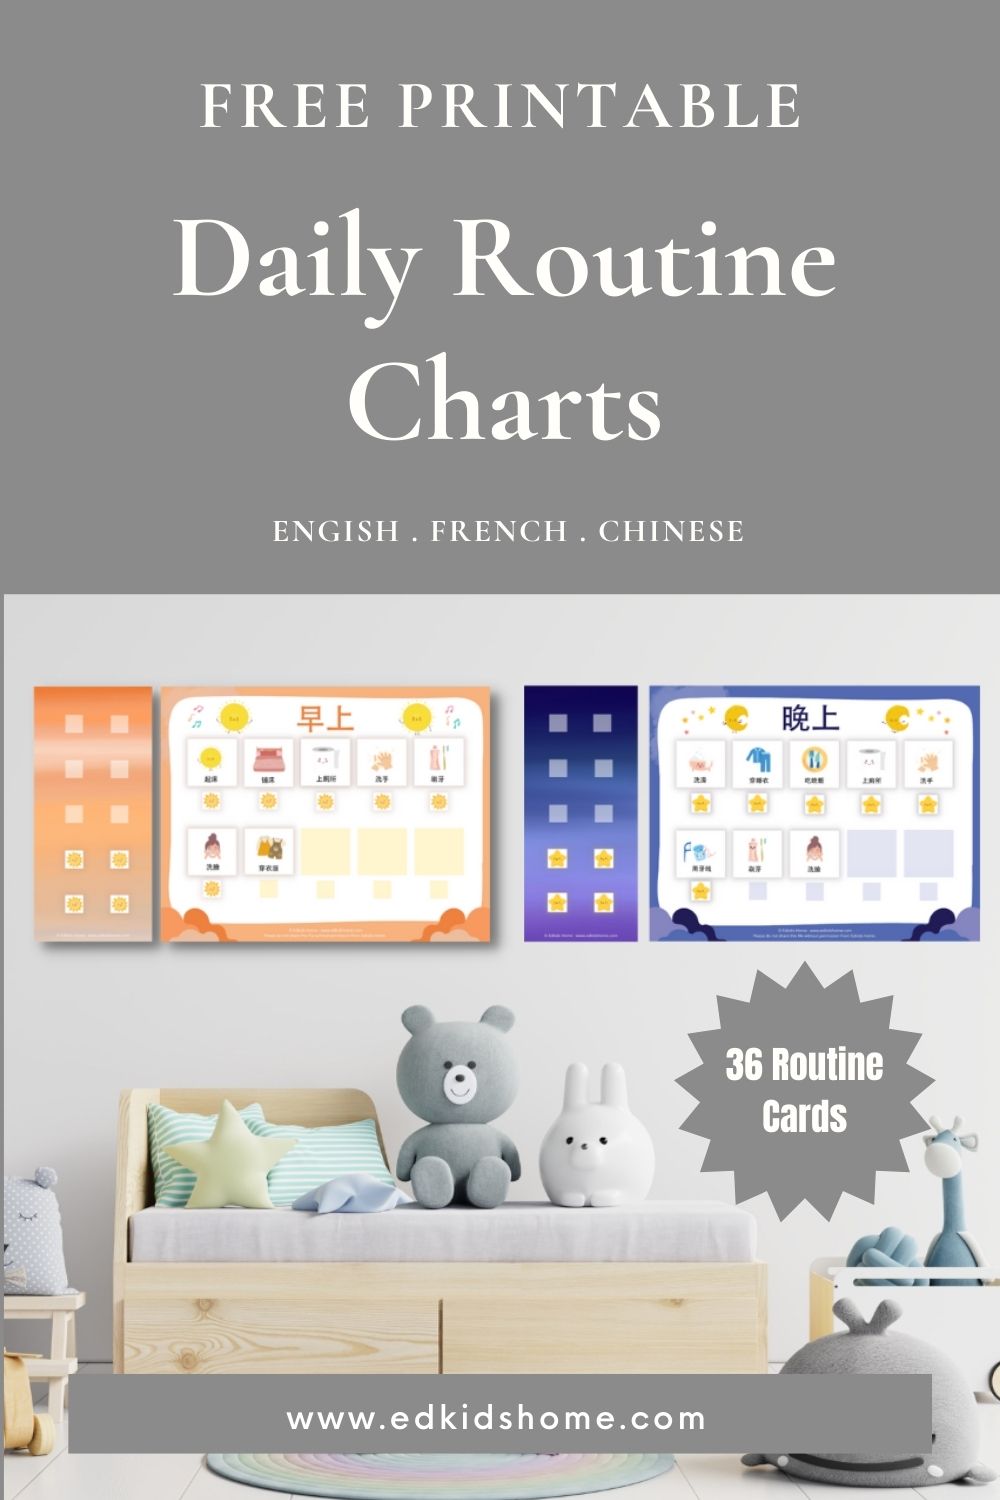 Free Daily Routine Charts (Morning & Evening) - 36 routine cards
Available in English, French, Chinese